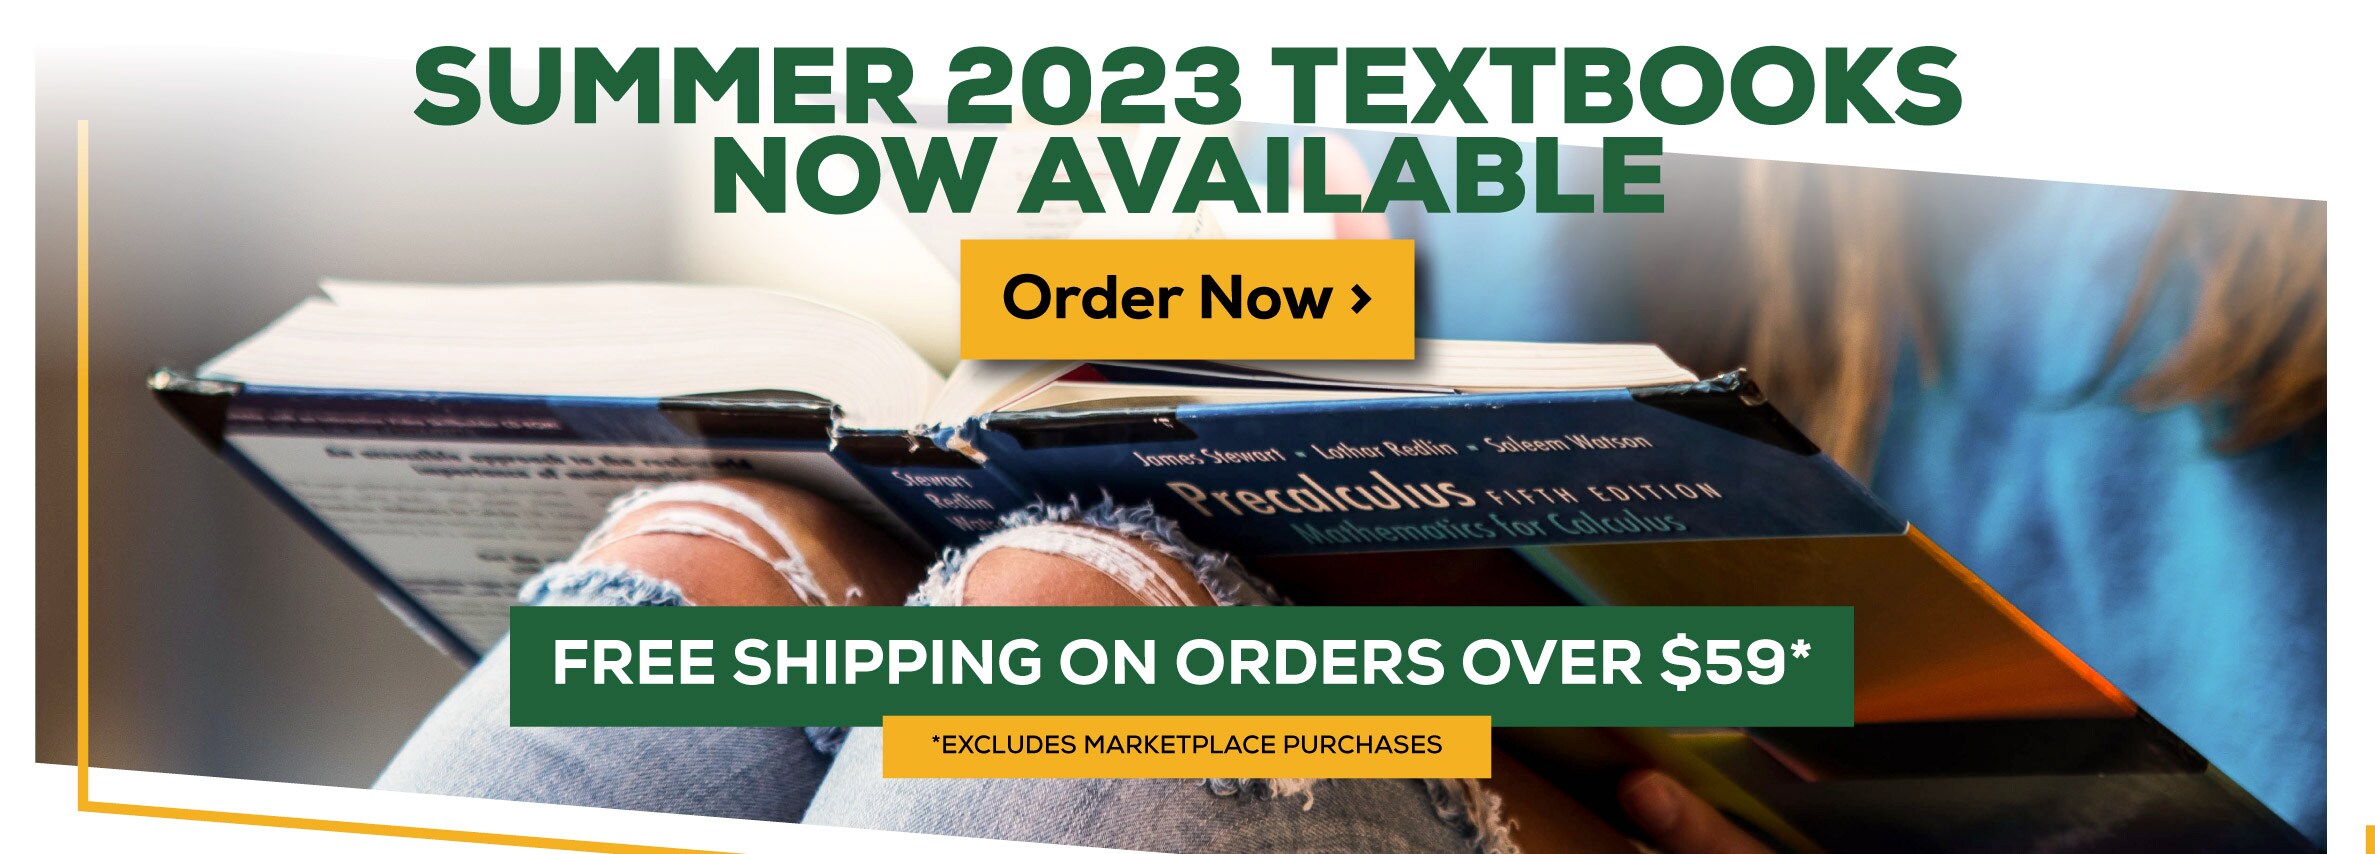 Summer 2023 Textbooks Now Available - Order Now > Free shipping on orders over $59* Excludes marketplace purchases